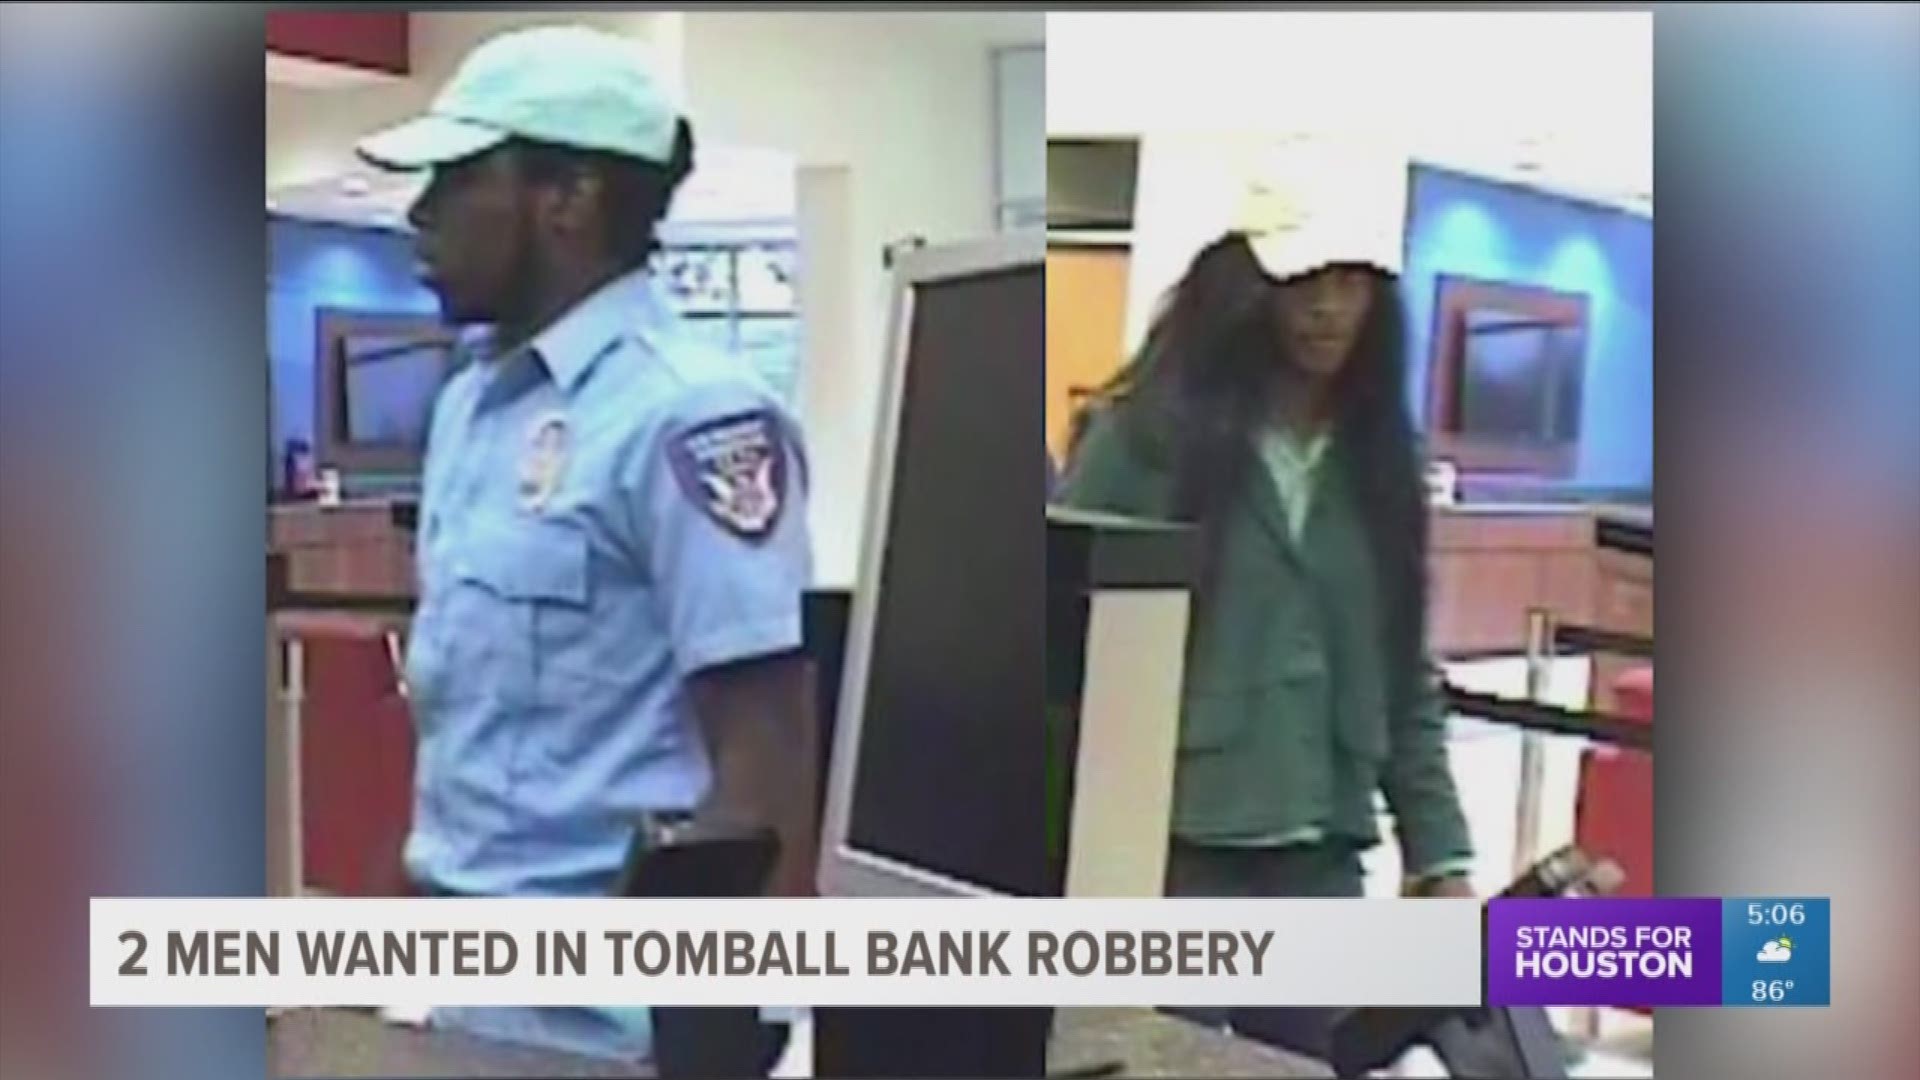 FBI officials are seeking the public's help in identifying two men accused of robbing a Tomball bank Tuesday afternoon.